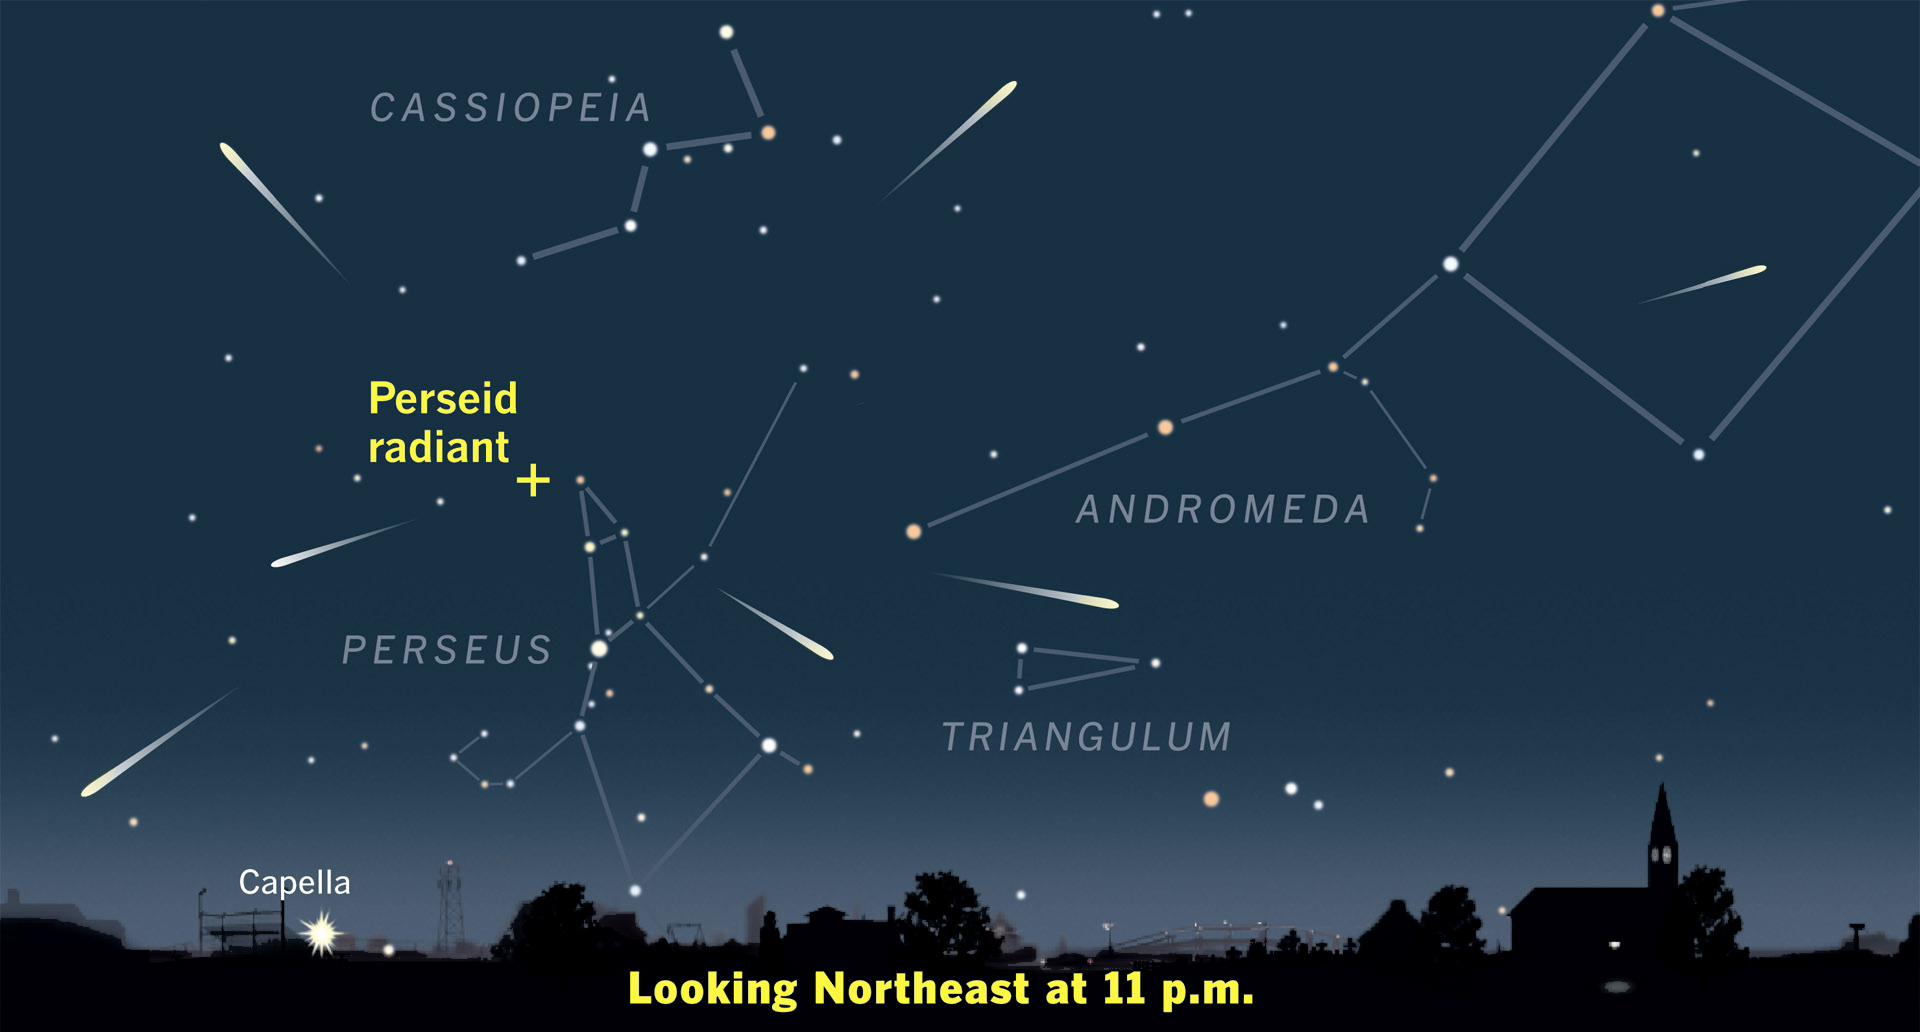 Perseid Meteor Shower Peaks This Weekend with Ideal Conditions